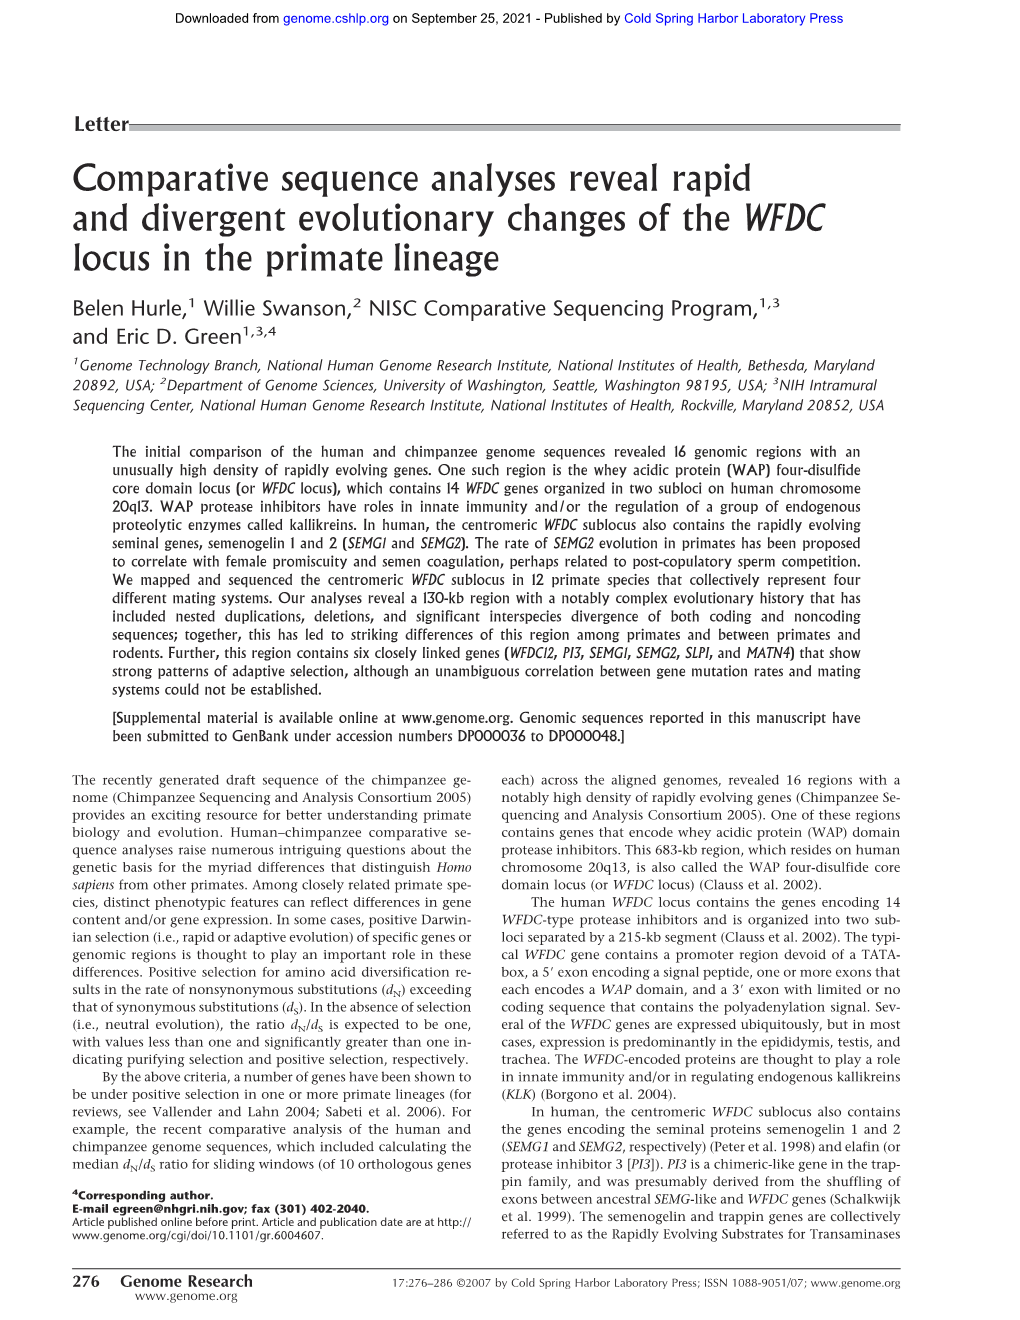 Comparative Sequence Analyses Reveal Rapid and Divergent Evolutionary Changes of the WFDC Locus in the Primate Lineage